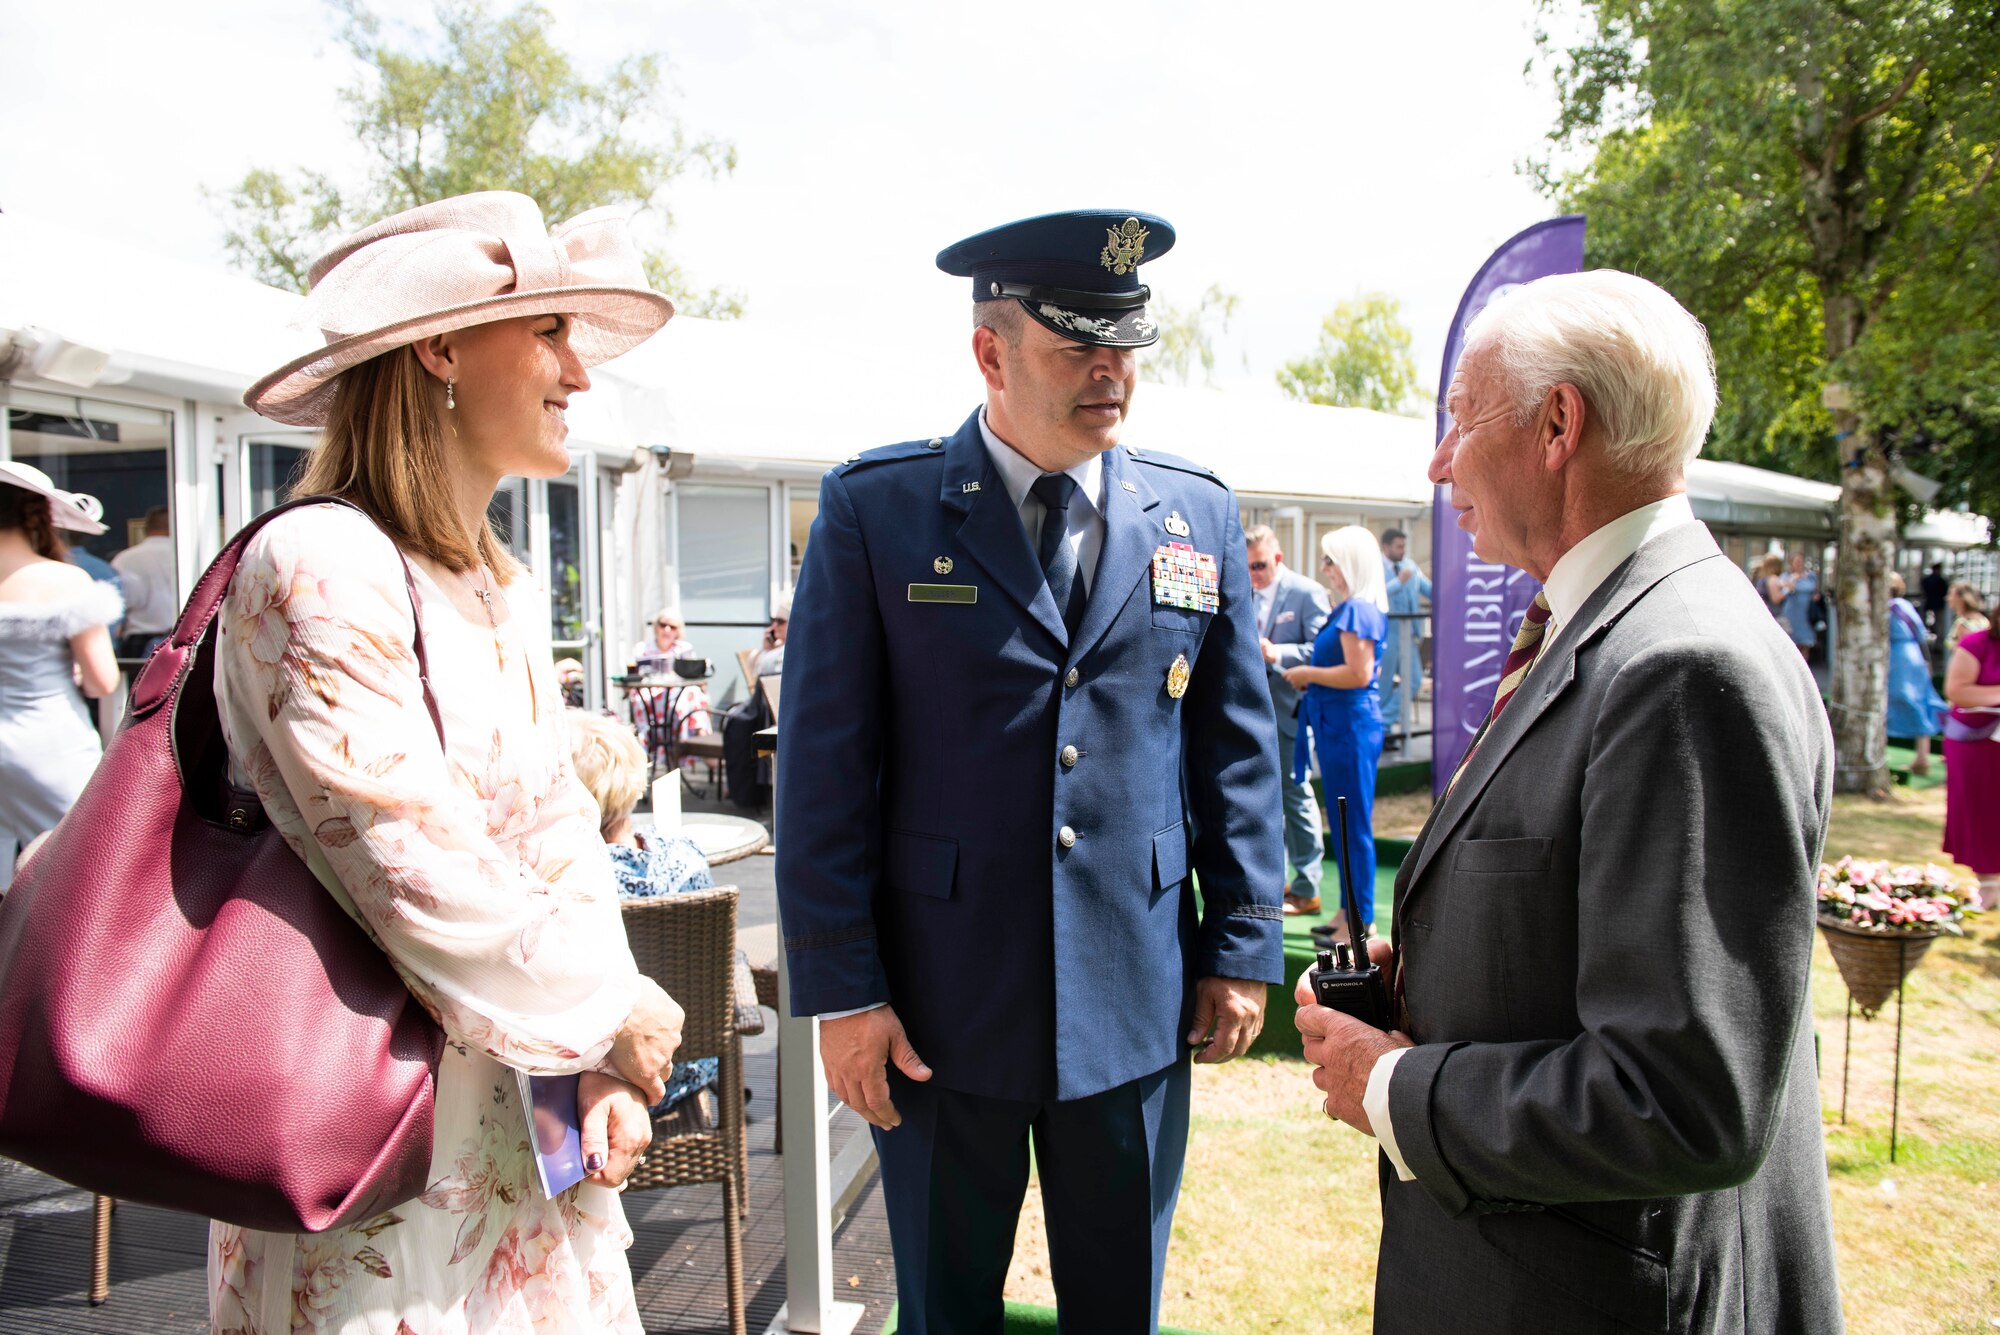 U.S. Air Force Col. Brian Filler, center, 501st Combat Support Wing commander, engages with attendees during the Cambridgeshire County Day at the Newmarket July Course, England, June 23, 2022. The County Day was an opportunity to celebrate Cambridgeshire and Her Majesty The Queen’s Platinum Jubilee. (U.S. Air Force photo by Senior Airman Jennifer Zima)